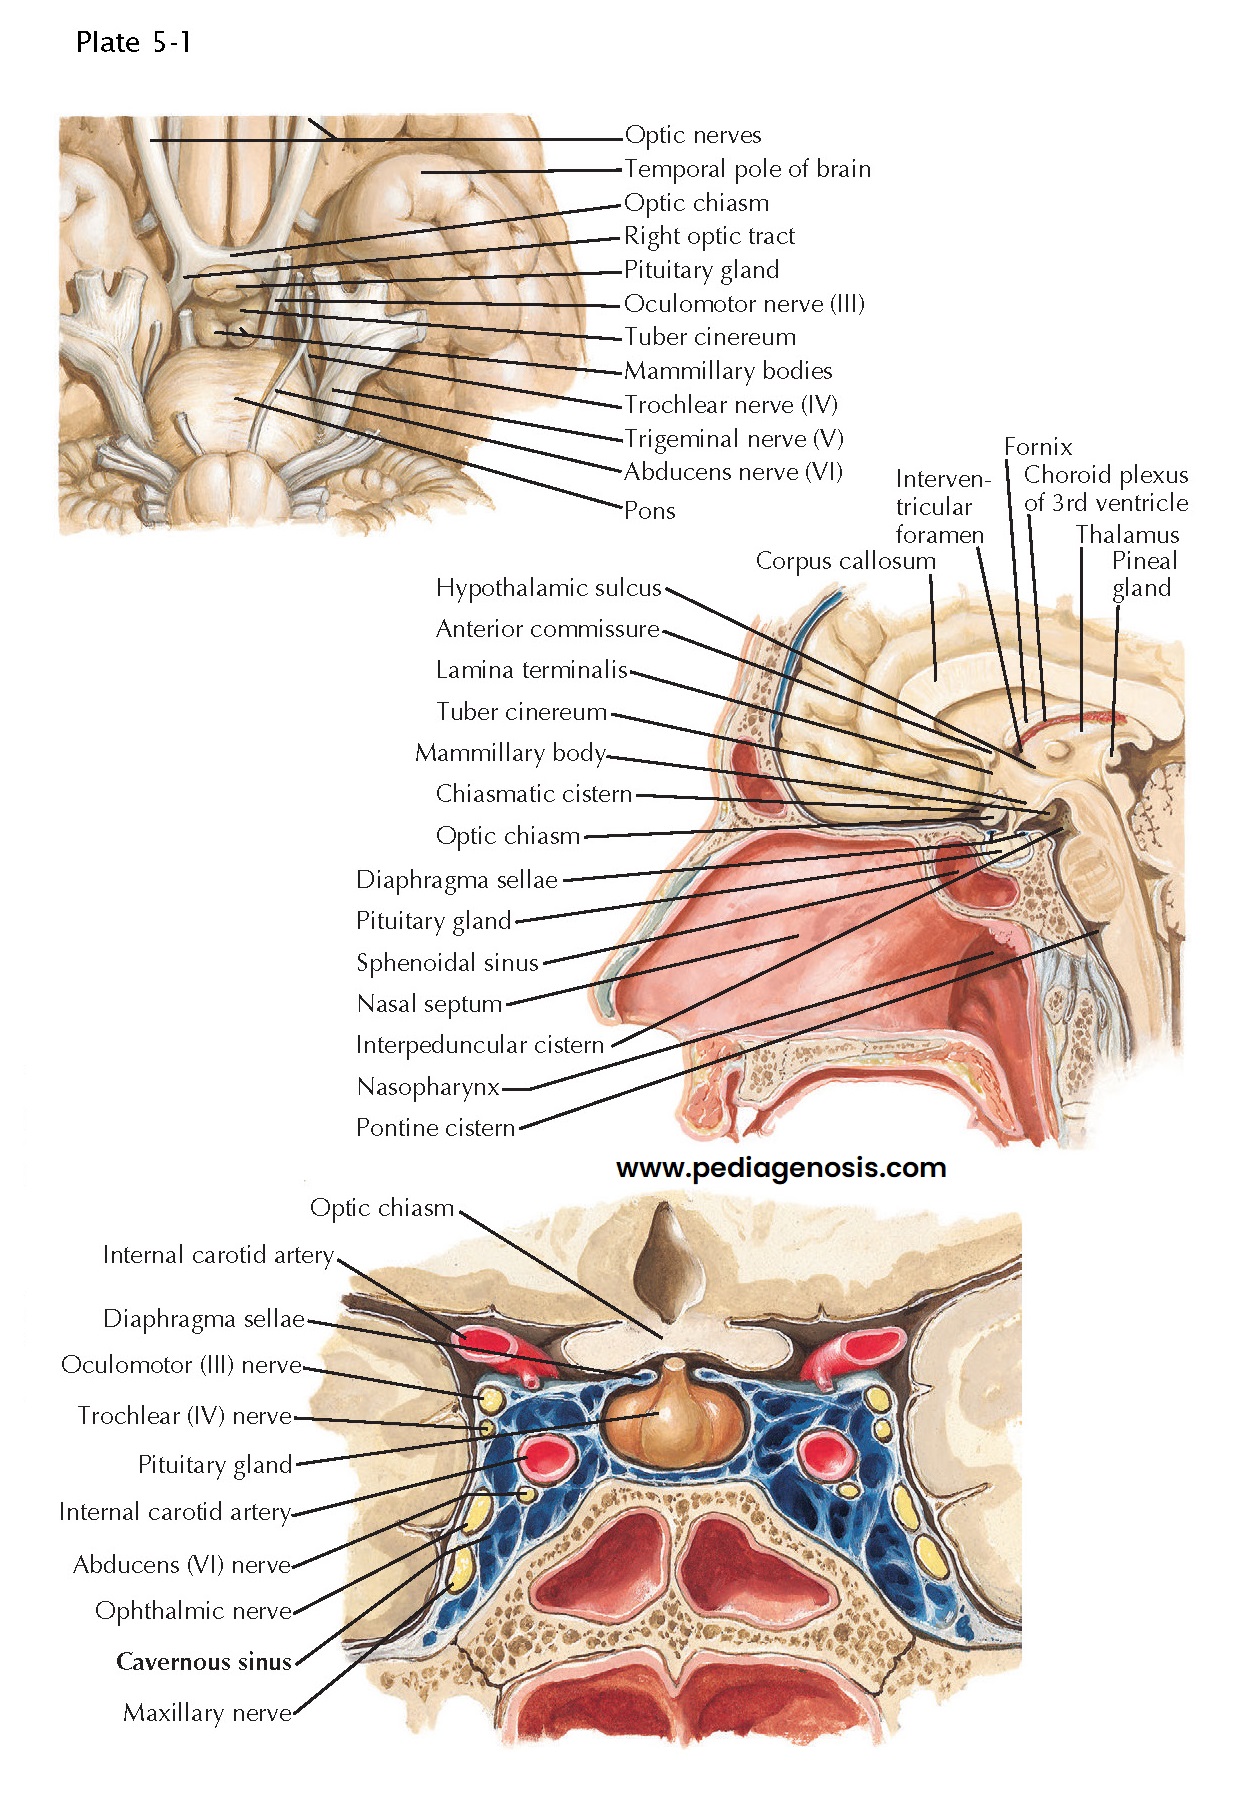 ANATOMY AND RELATIONS OF THE HYPOTHALAMUS AND PITUITARY GLAND